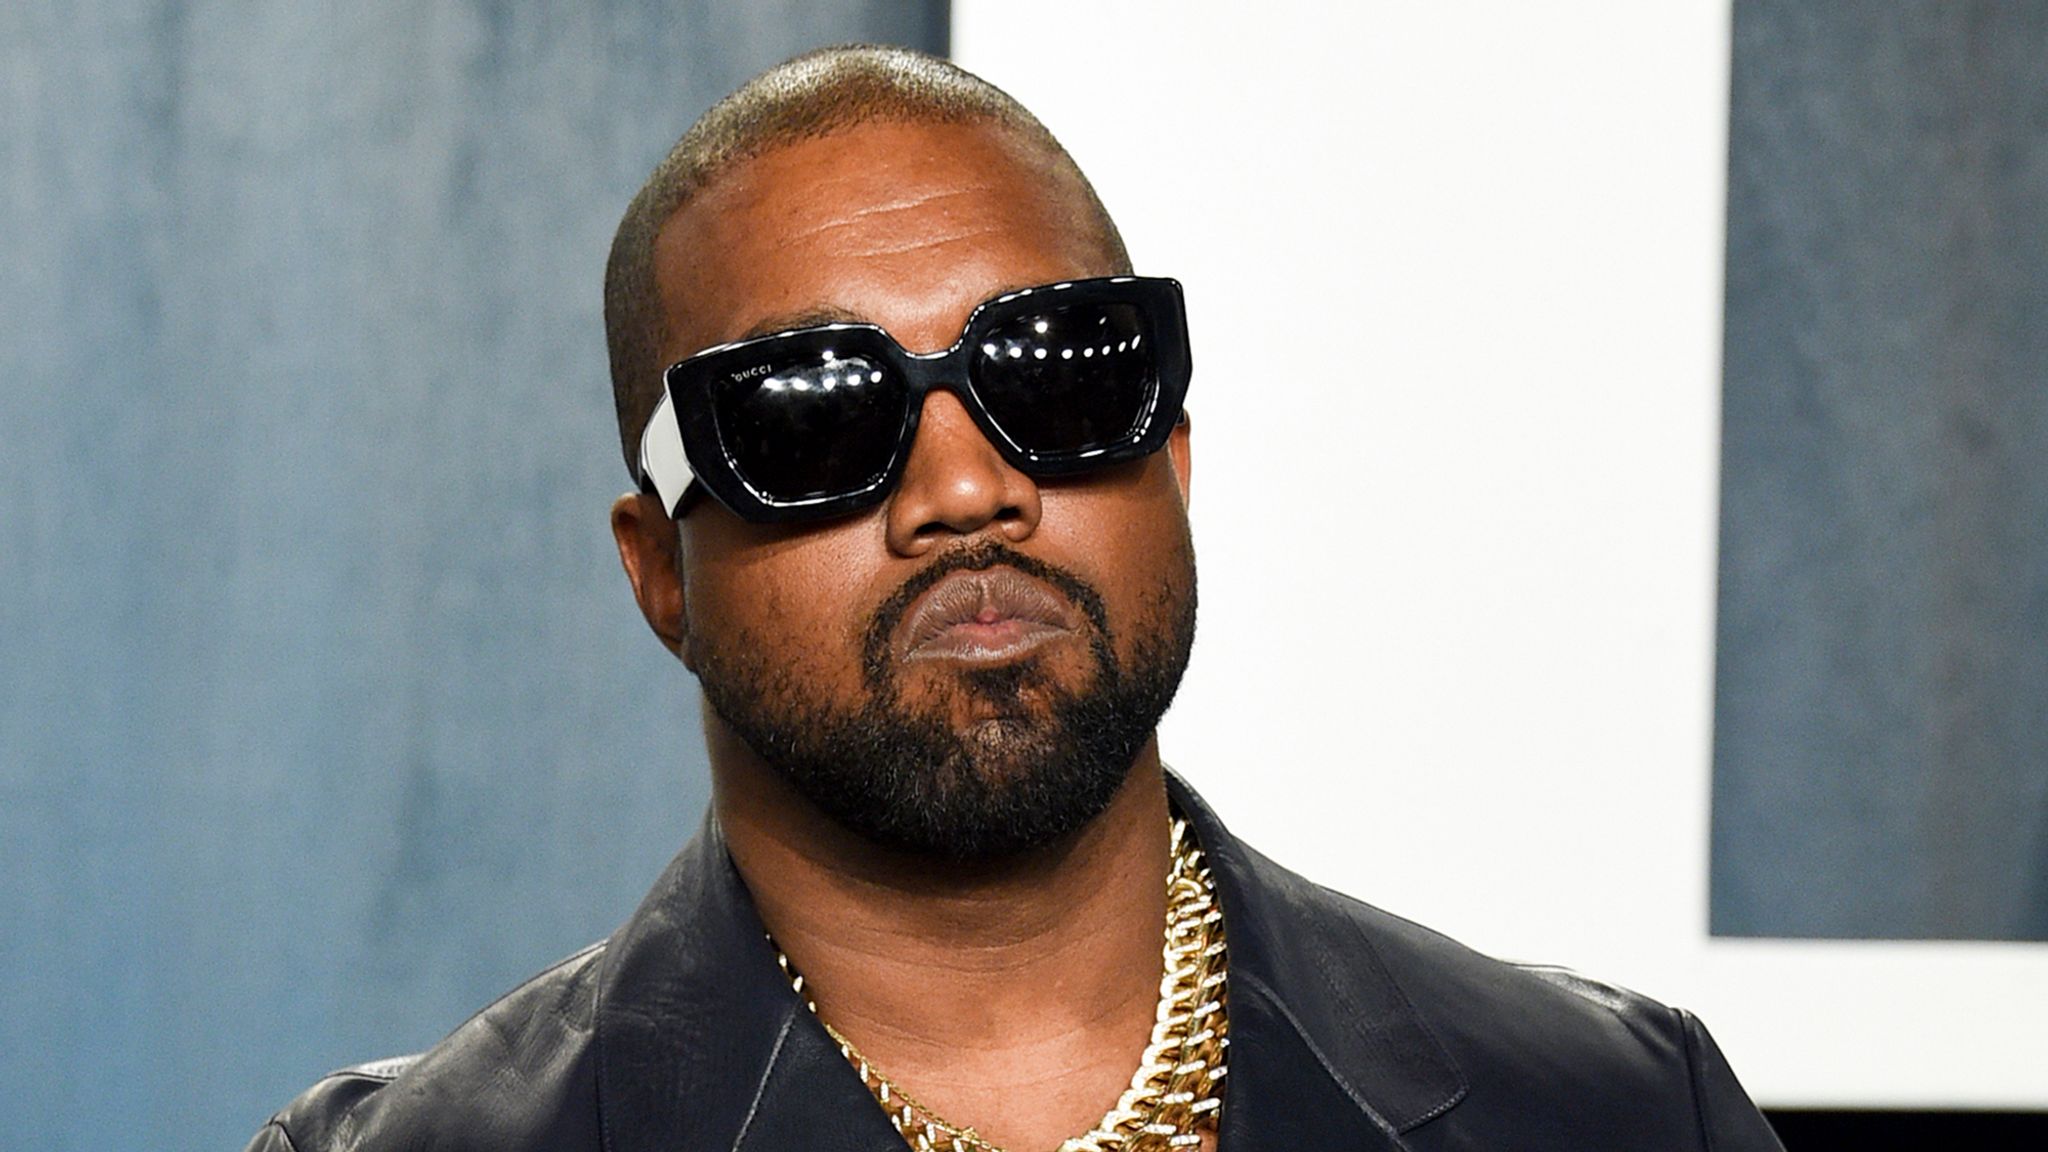 Kanye West could be denied entry to Australia over antisemitic comments